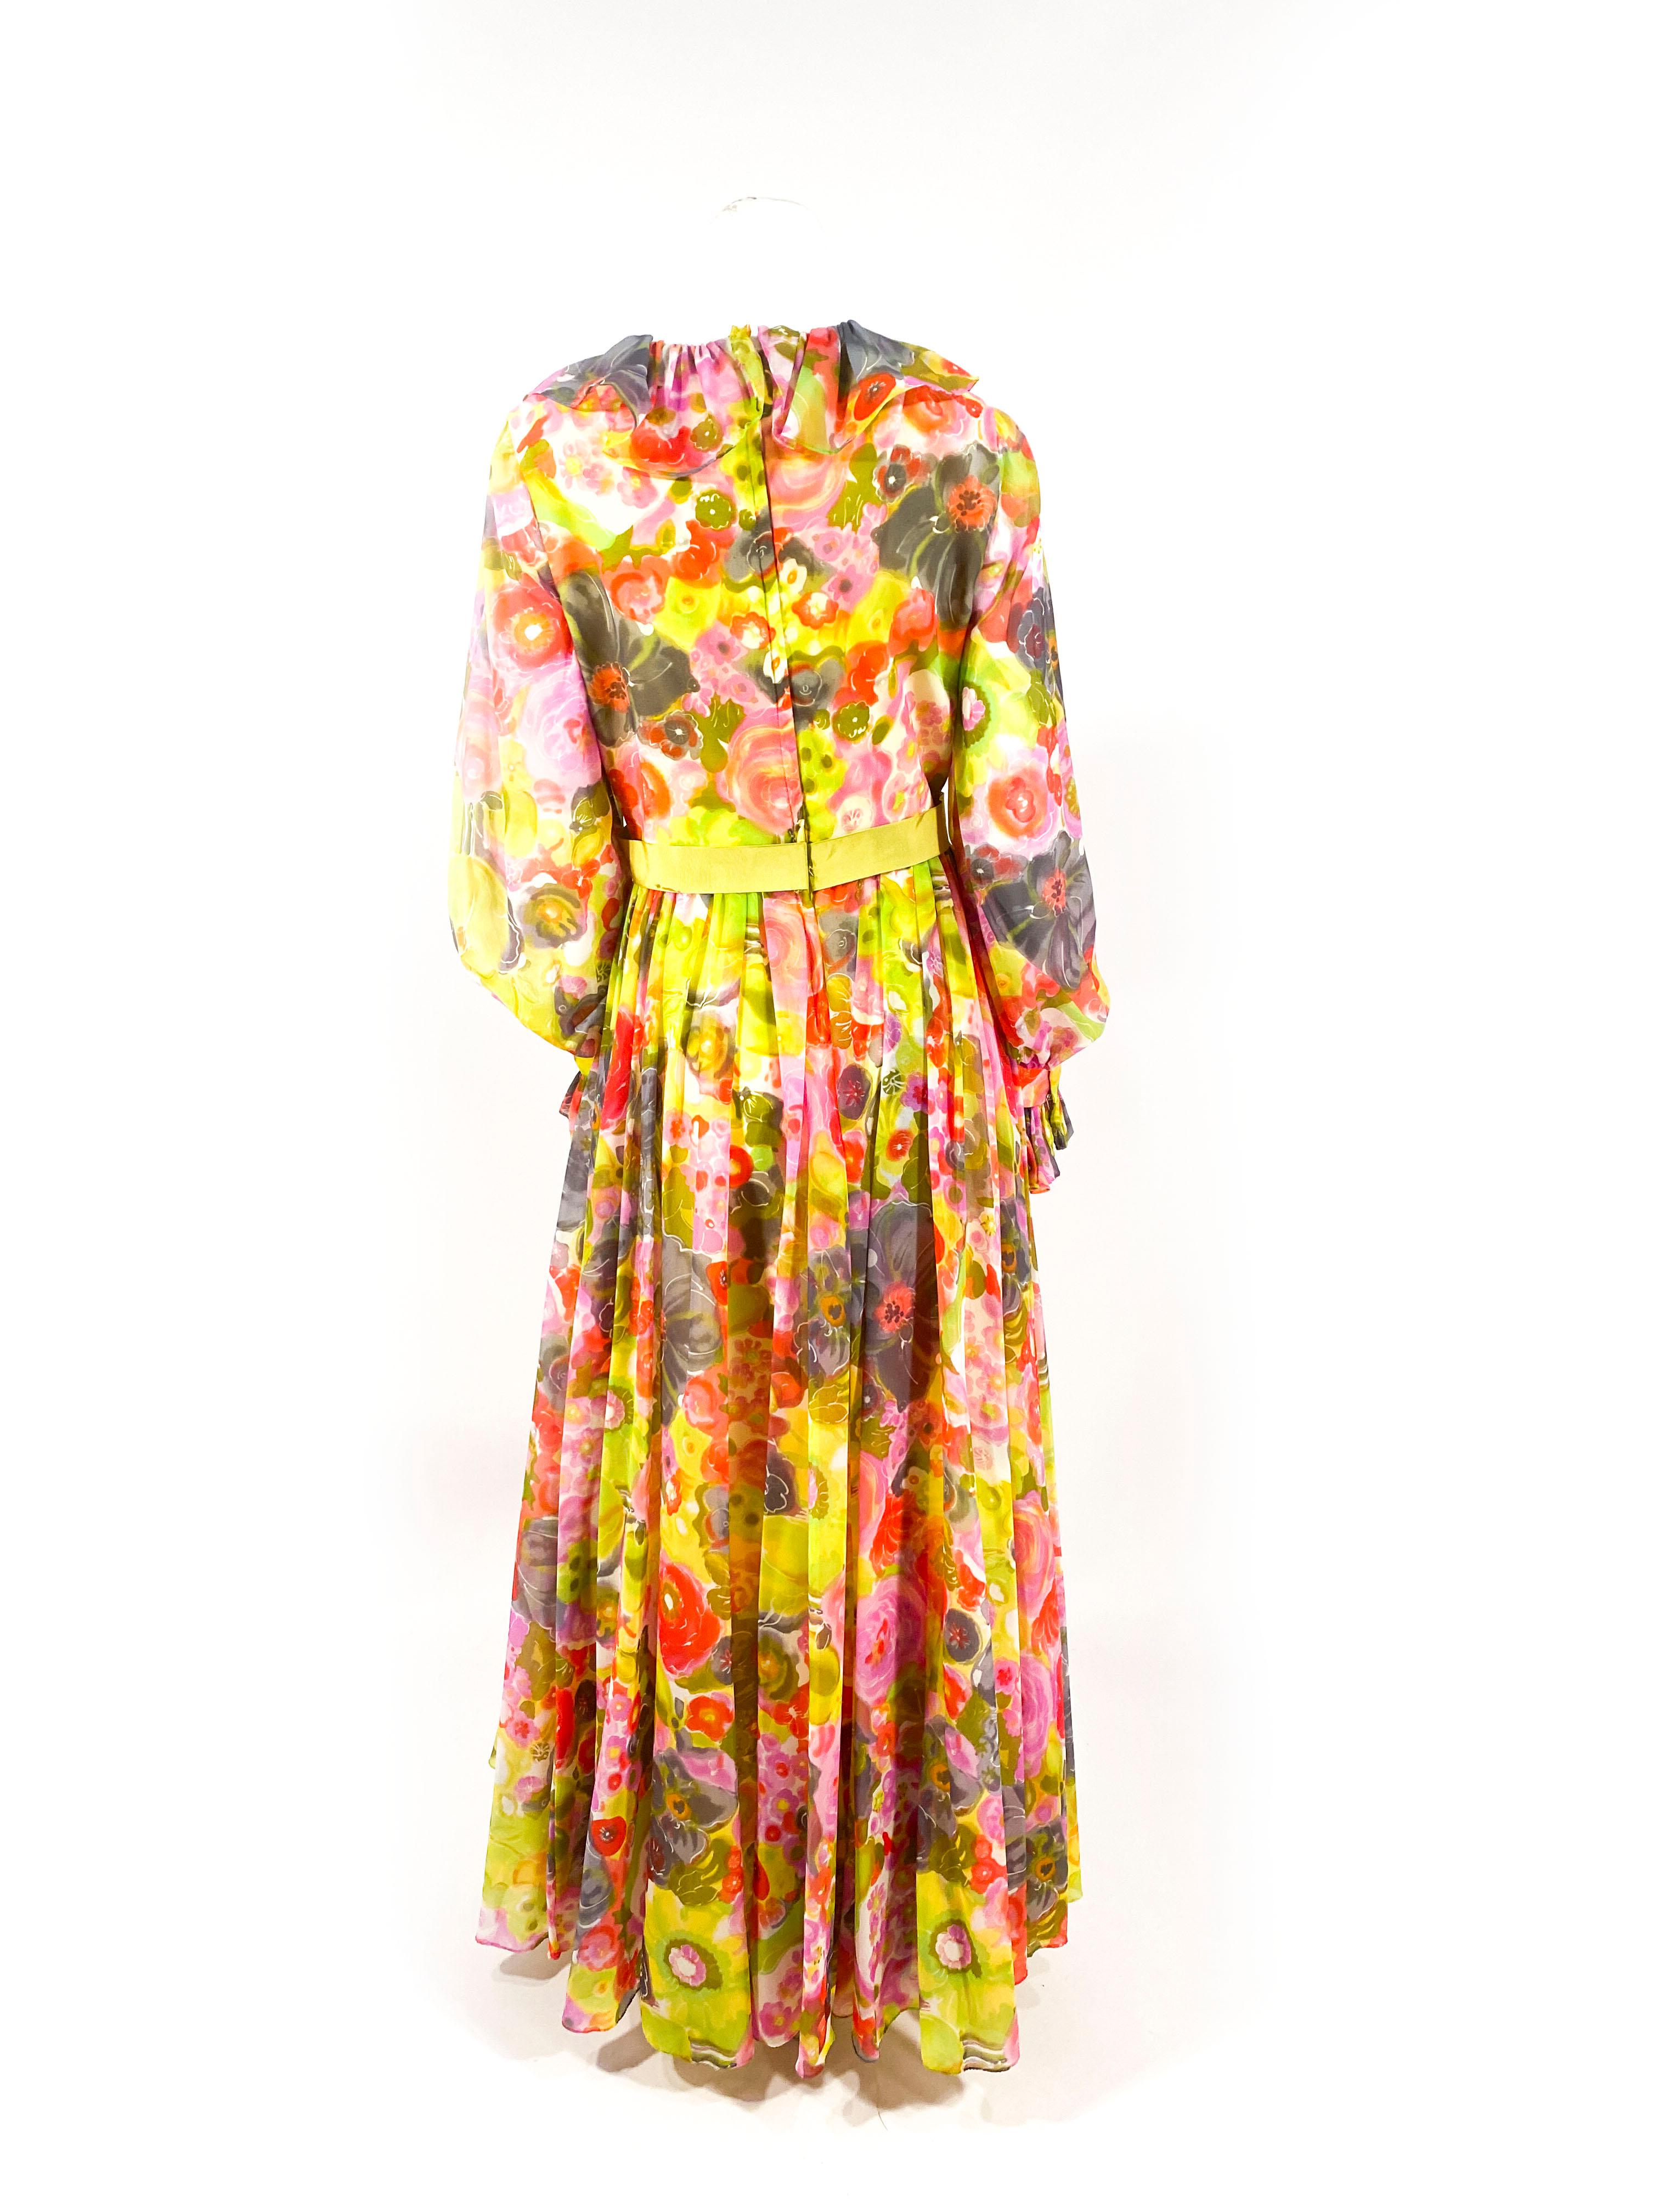 1970s Multi-colored Floral Printed Chiffon Dress 1